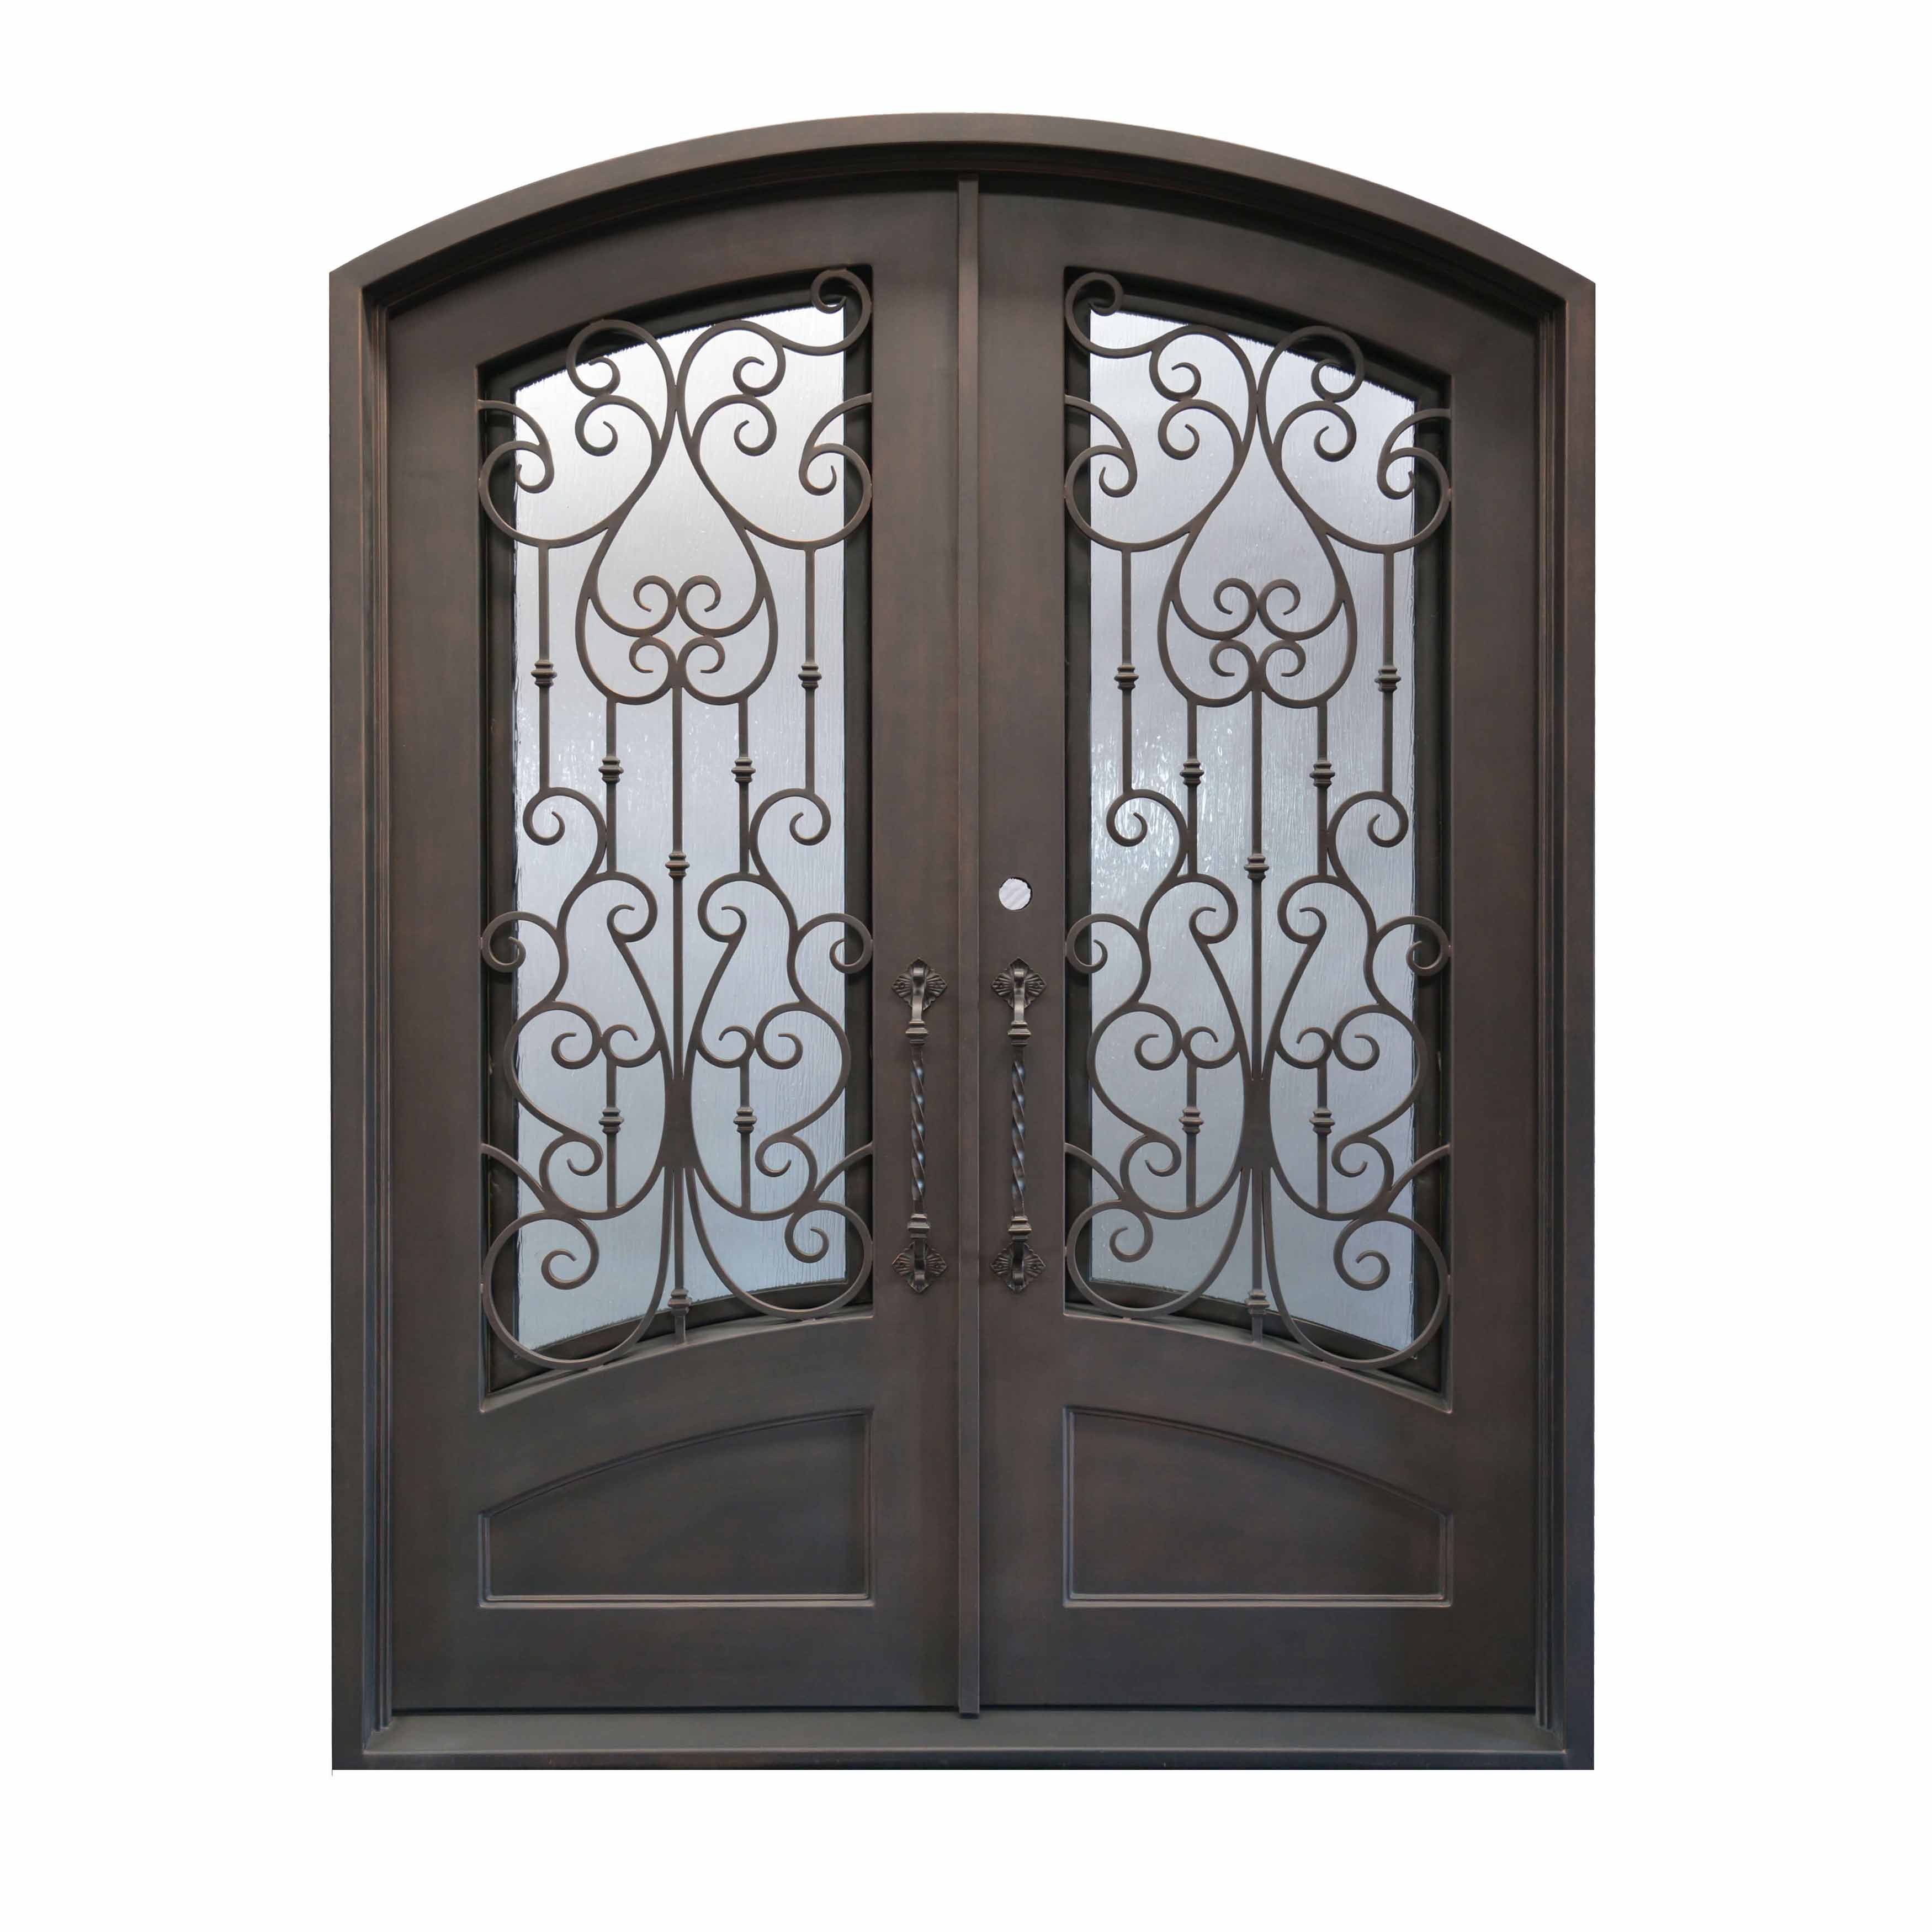 Customized thermal break wrought iron double door with eyebrow arched top